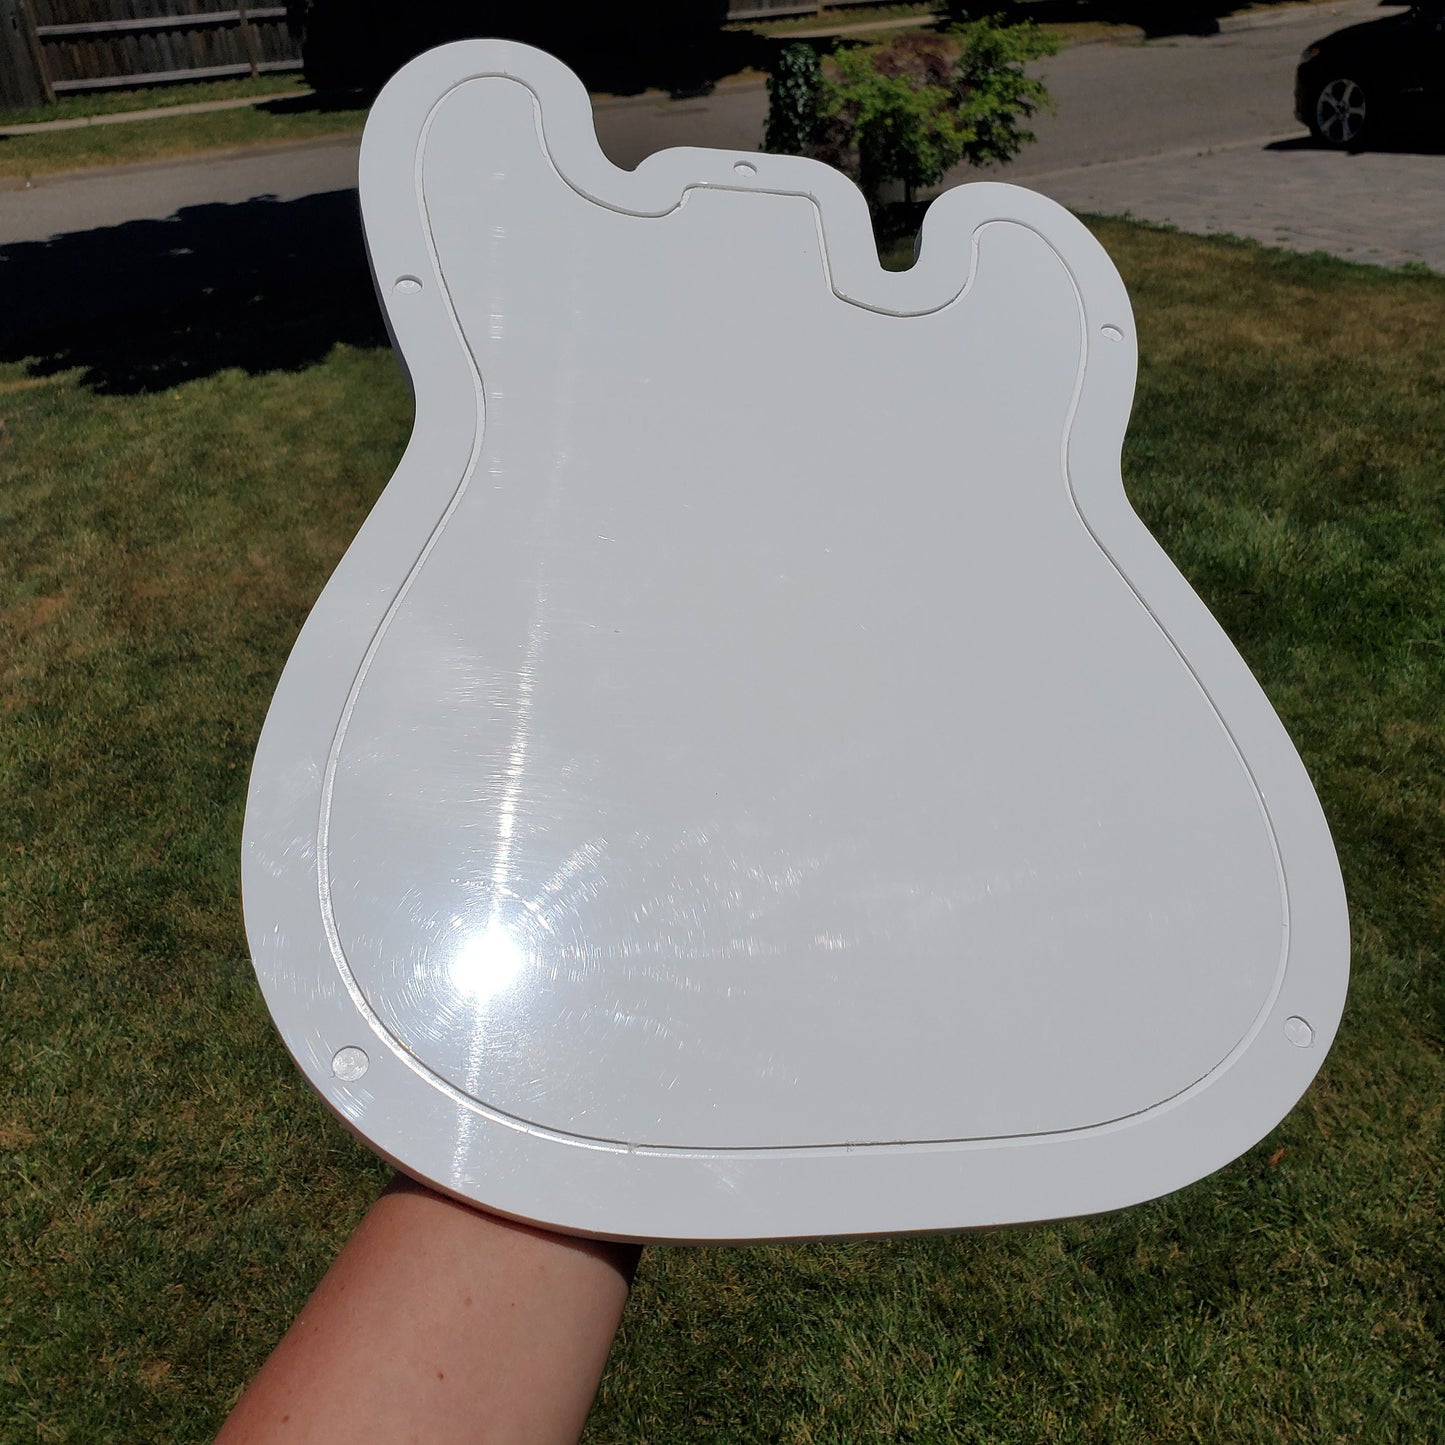 Fender Stratocaster HDPE Guitar Mold Shipping World Wide